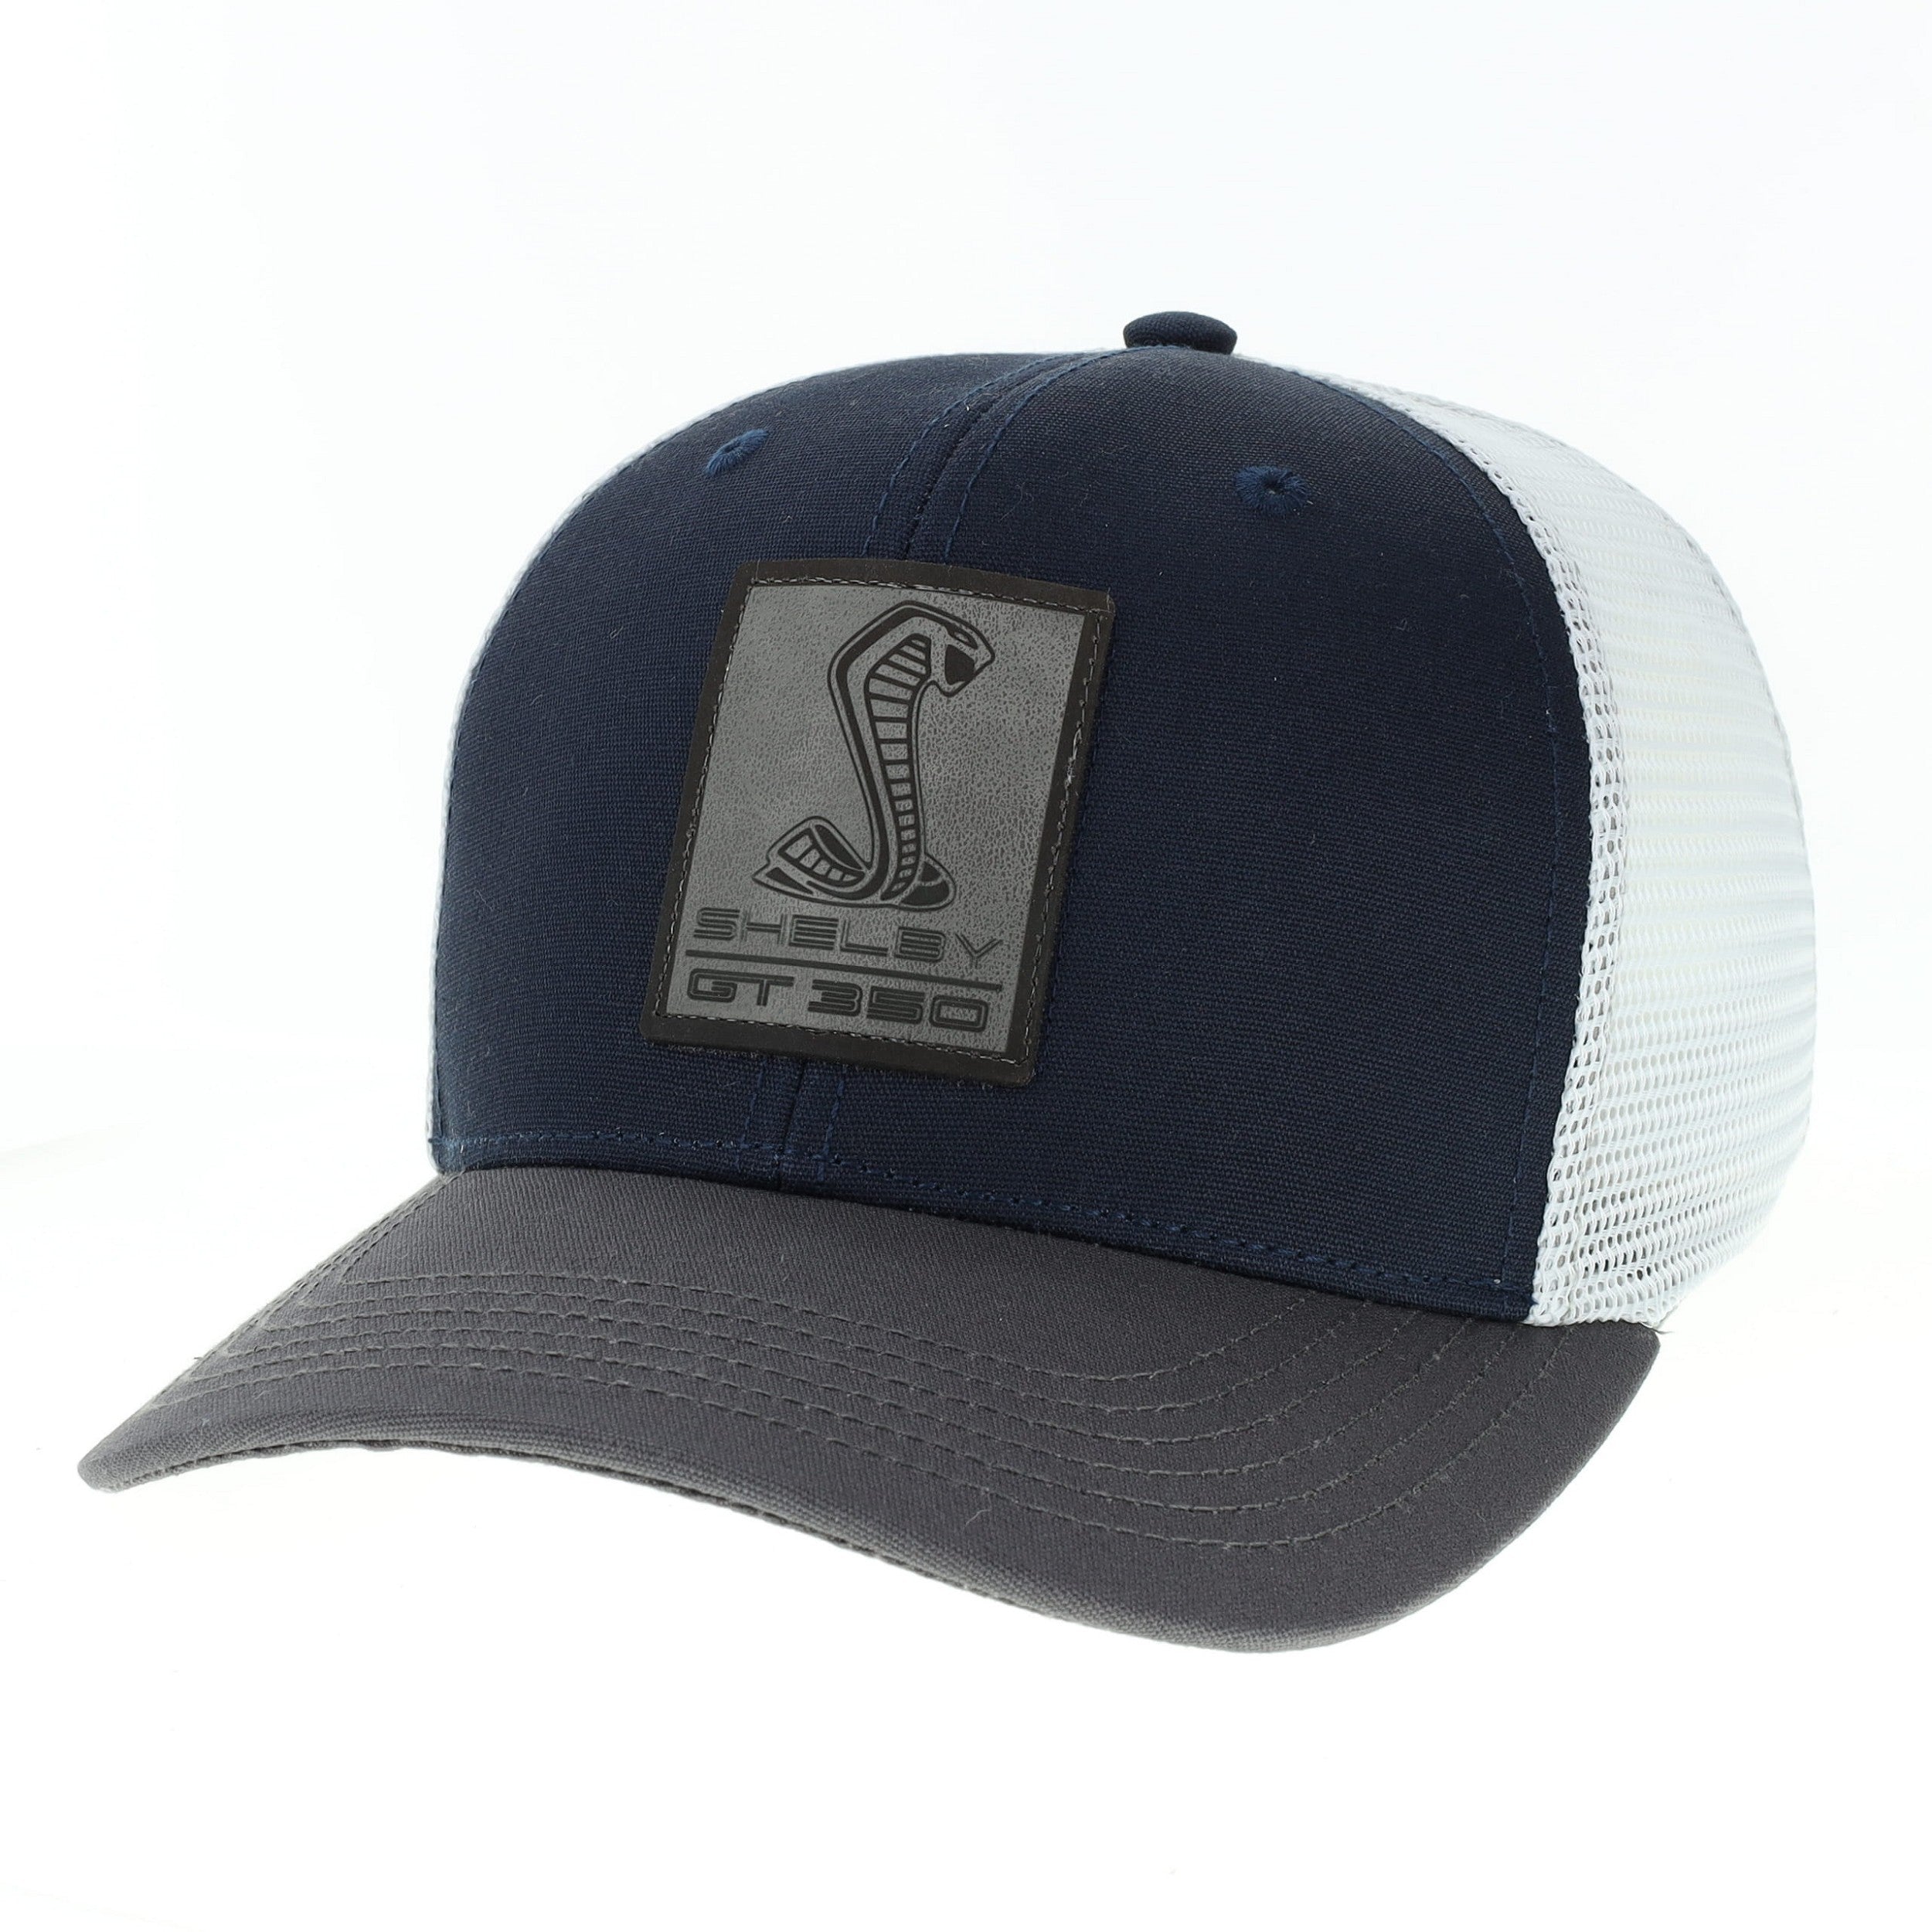 Shelby GT350 Hat - Grey Leather Patch